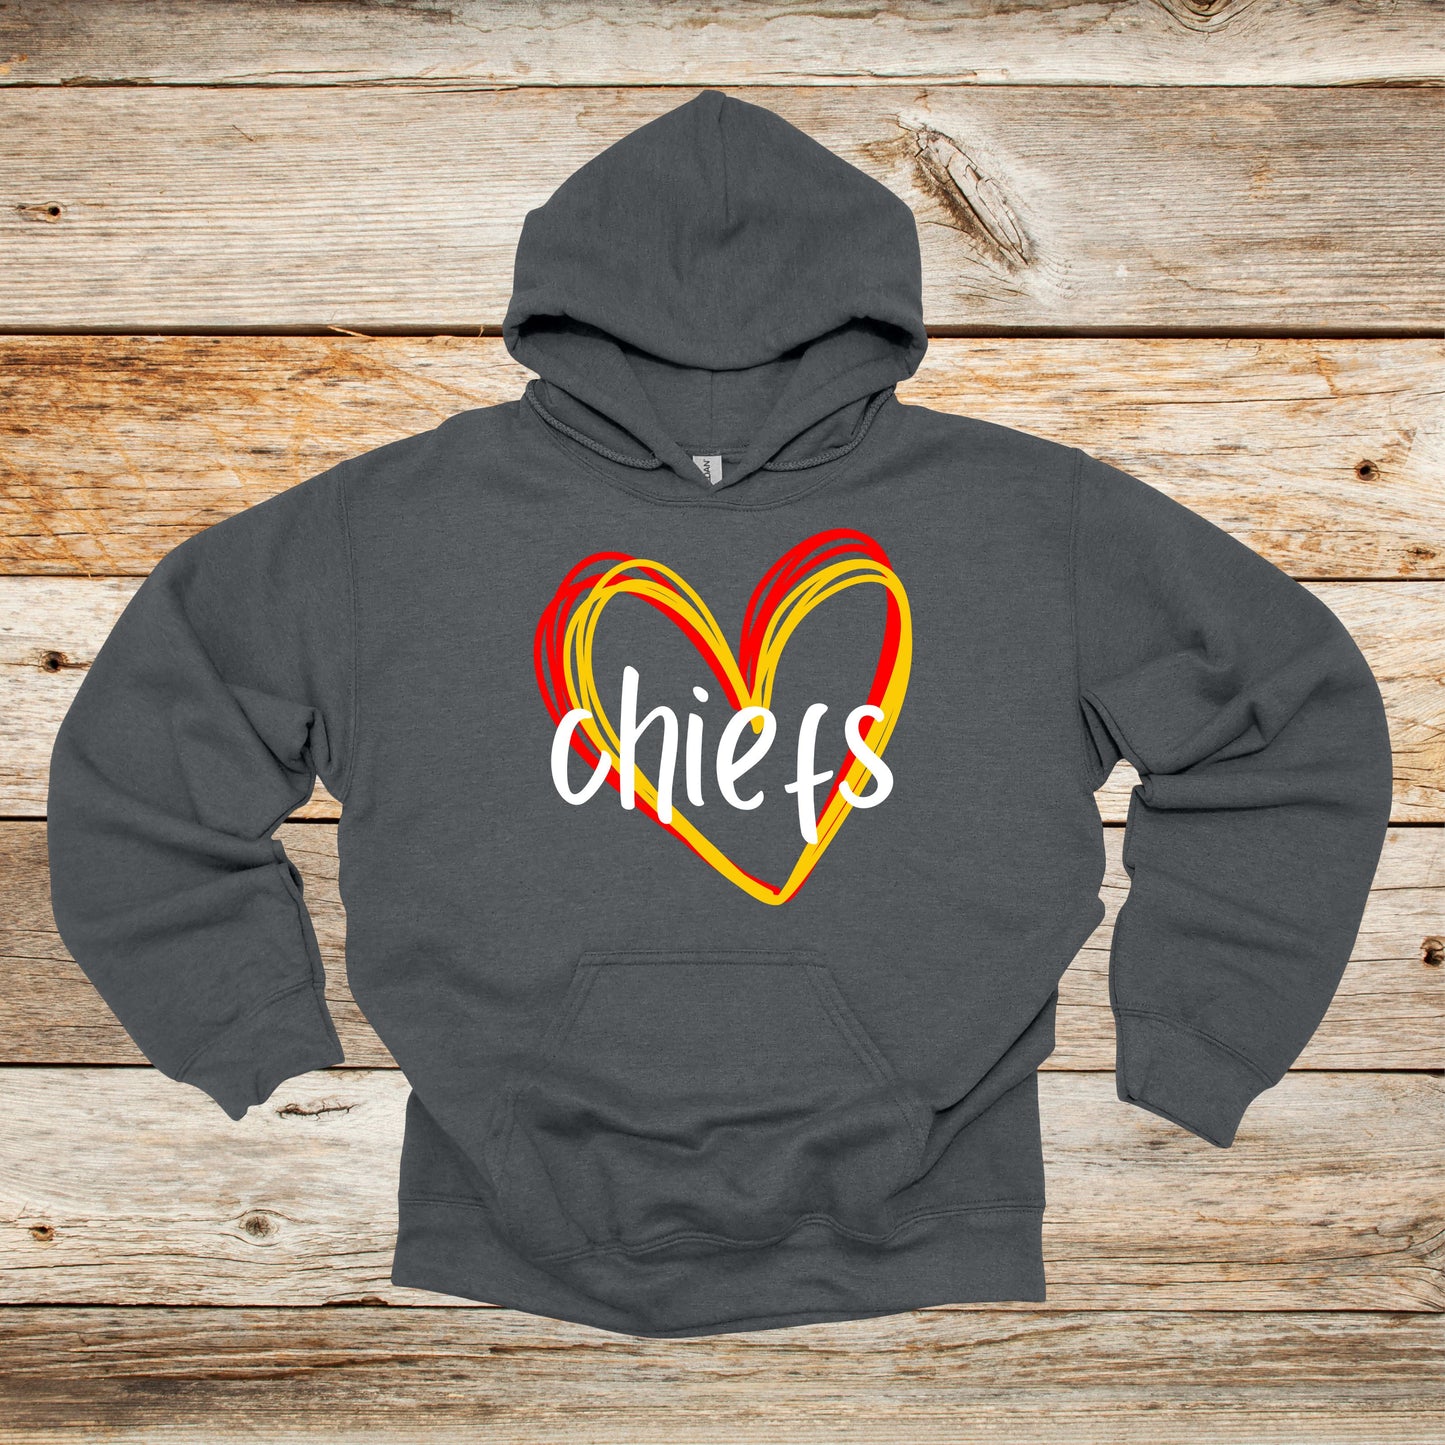 Football Crewneck and Hooded Sweatshirt - Chiefs Football - Adult and Children's Tee Shirts - Sports Hooded Sweatshirt Graphic Avenue Hooded Sweatshirt Dark Heather Adult Small